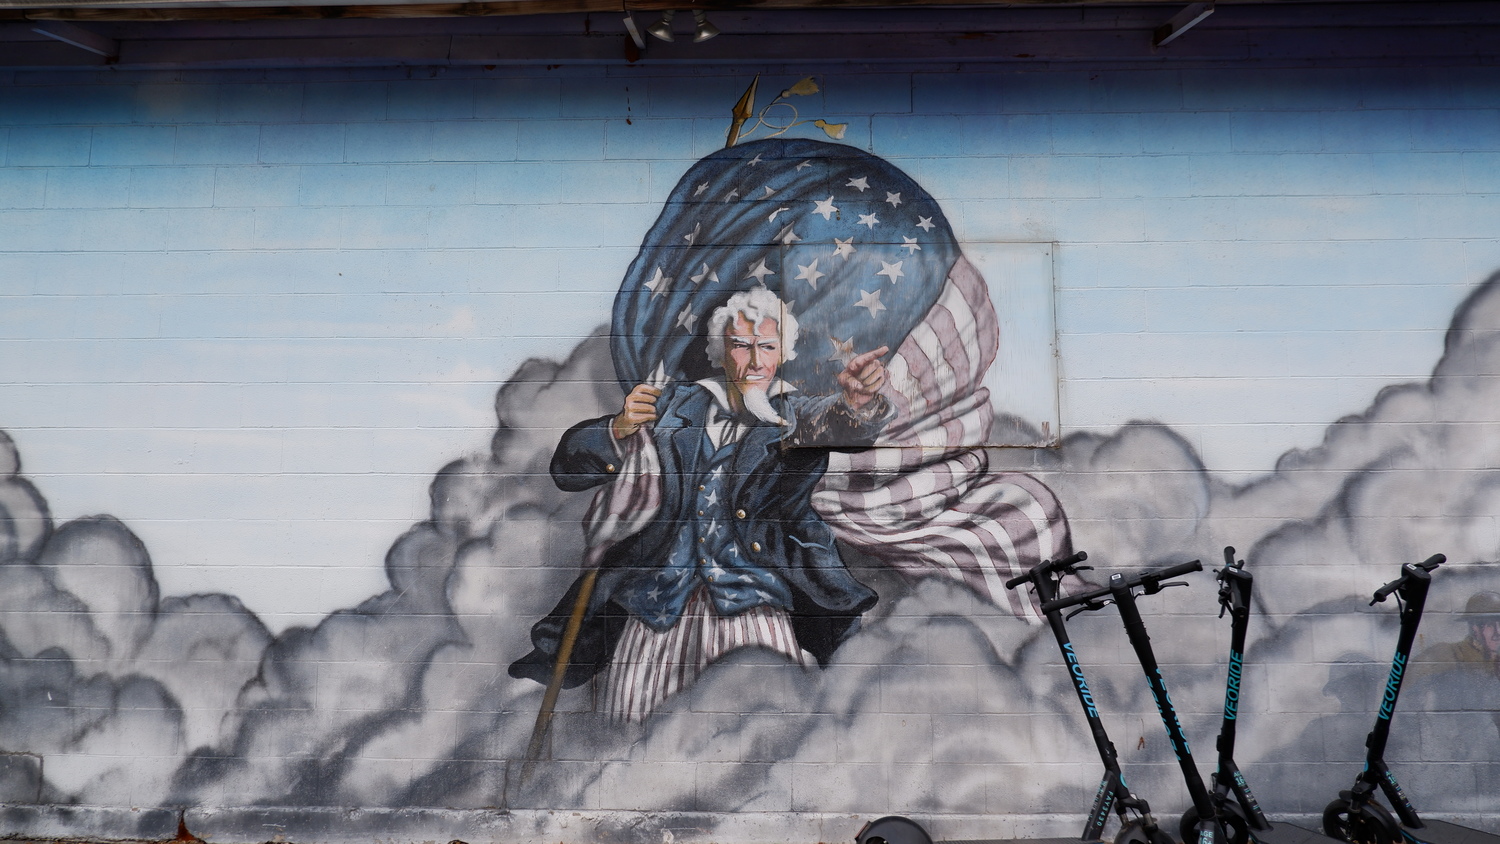 image of Freedom Wall